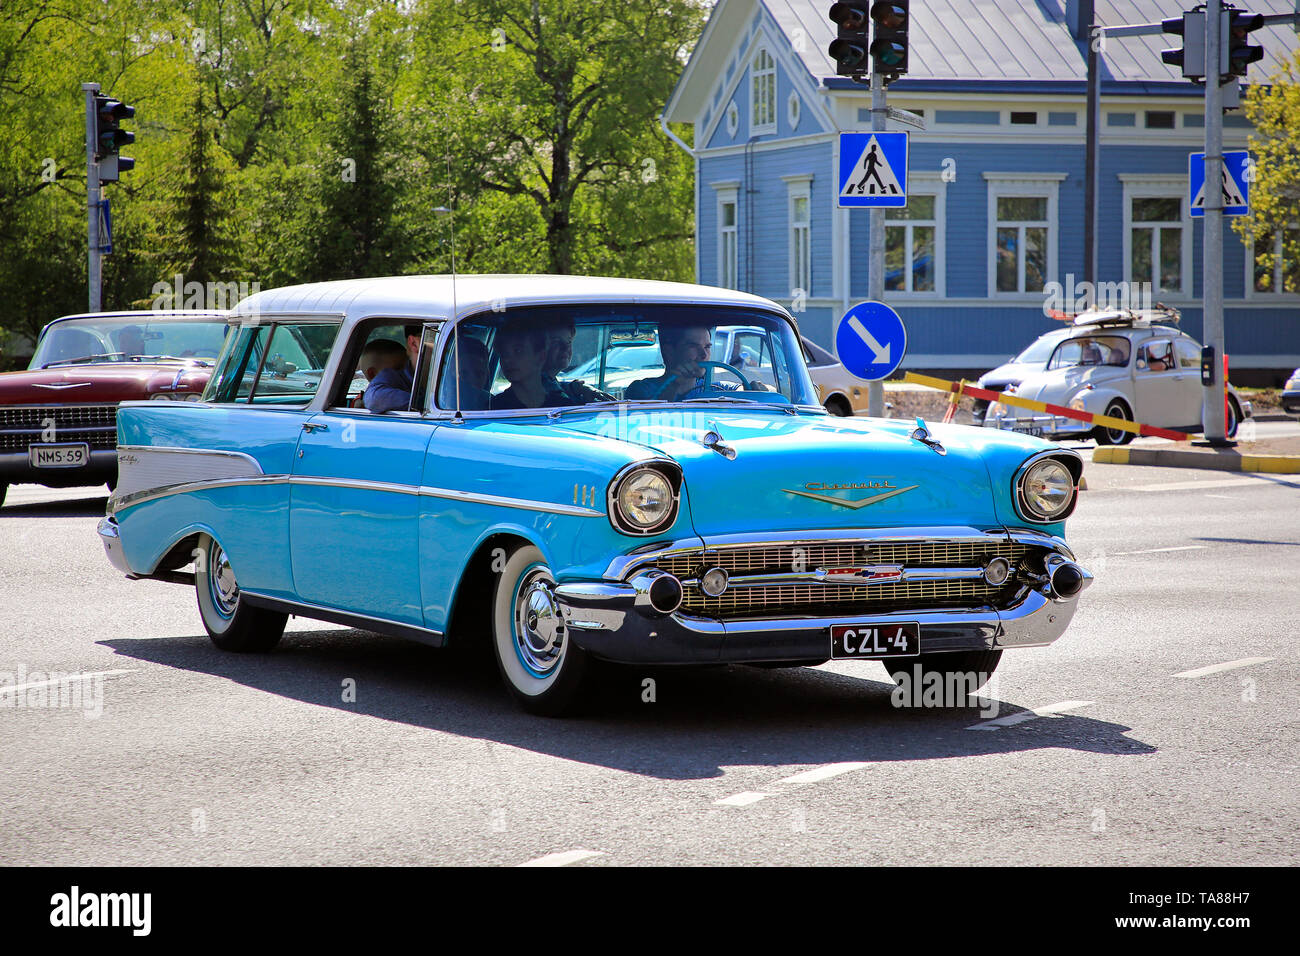 Salo, Finland. May 18, 2019. Turquoise Classic Chevrolet among ca 450 vintage cars gathering to Salo market square for Salon Maisema Cruising 2019. Stock Photo